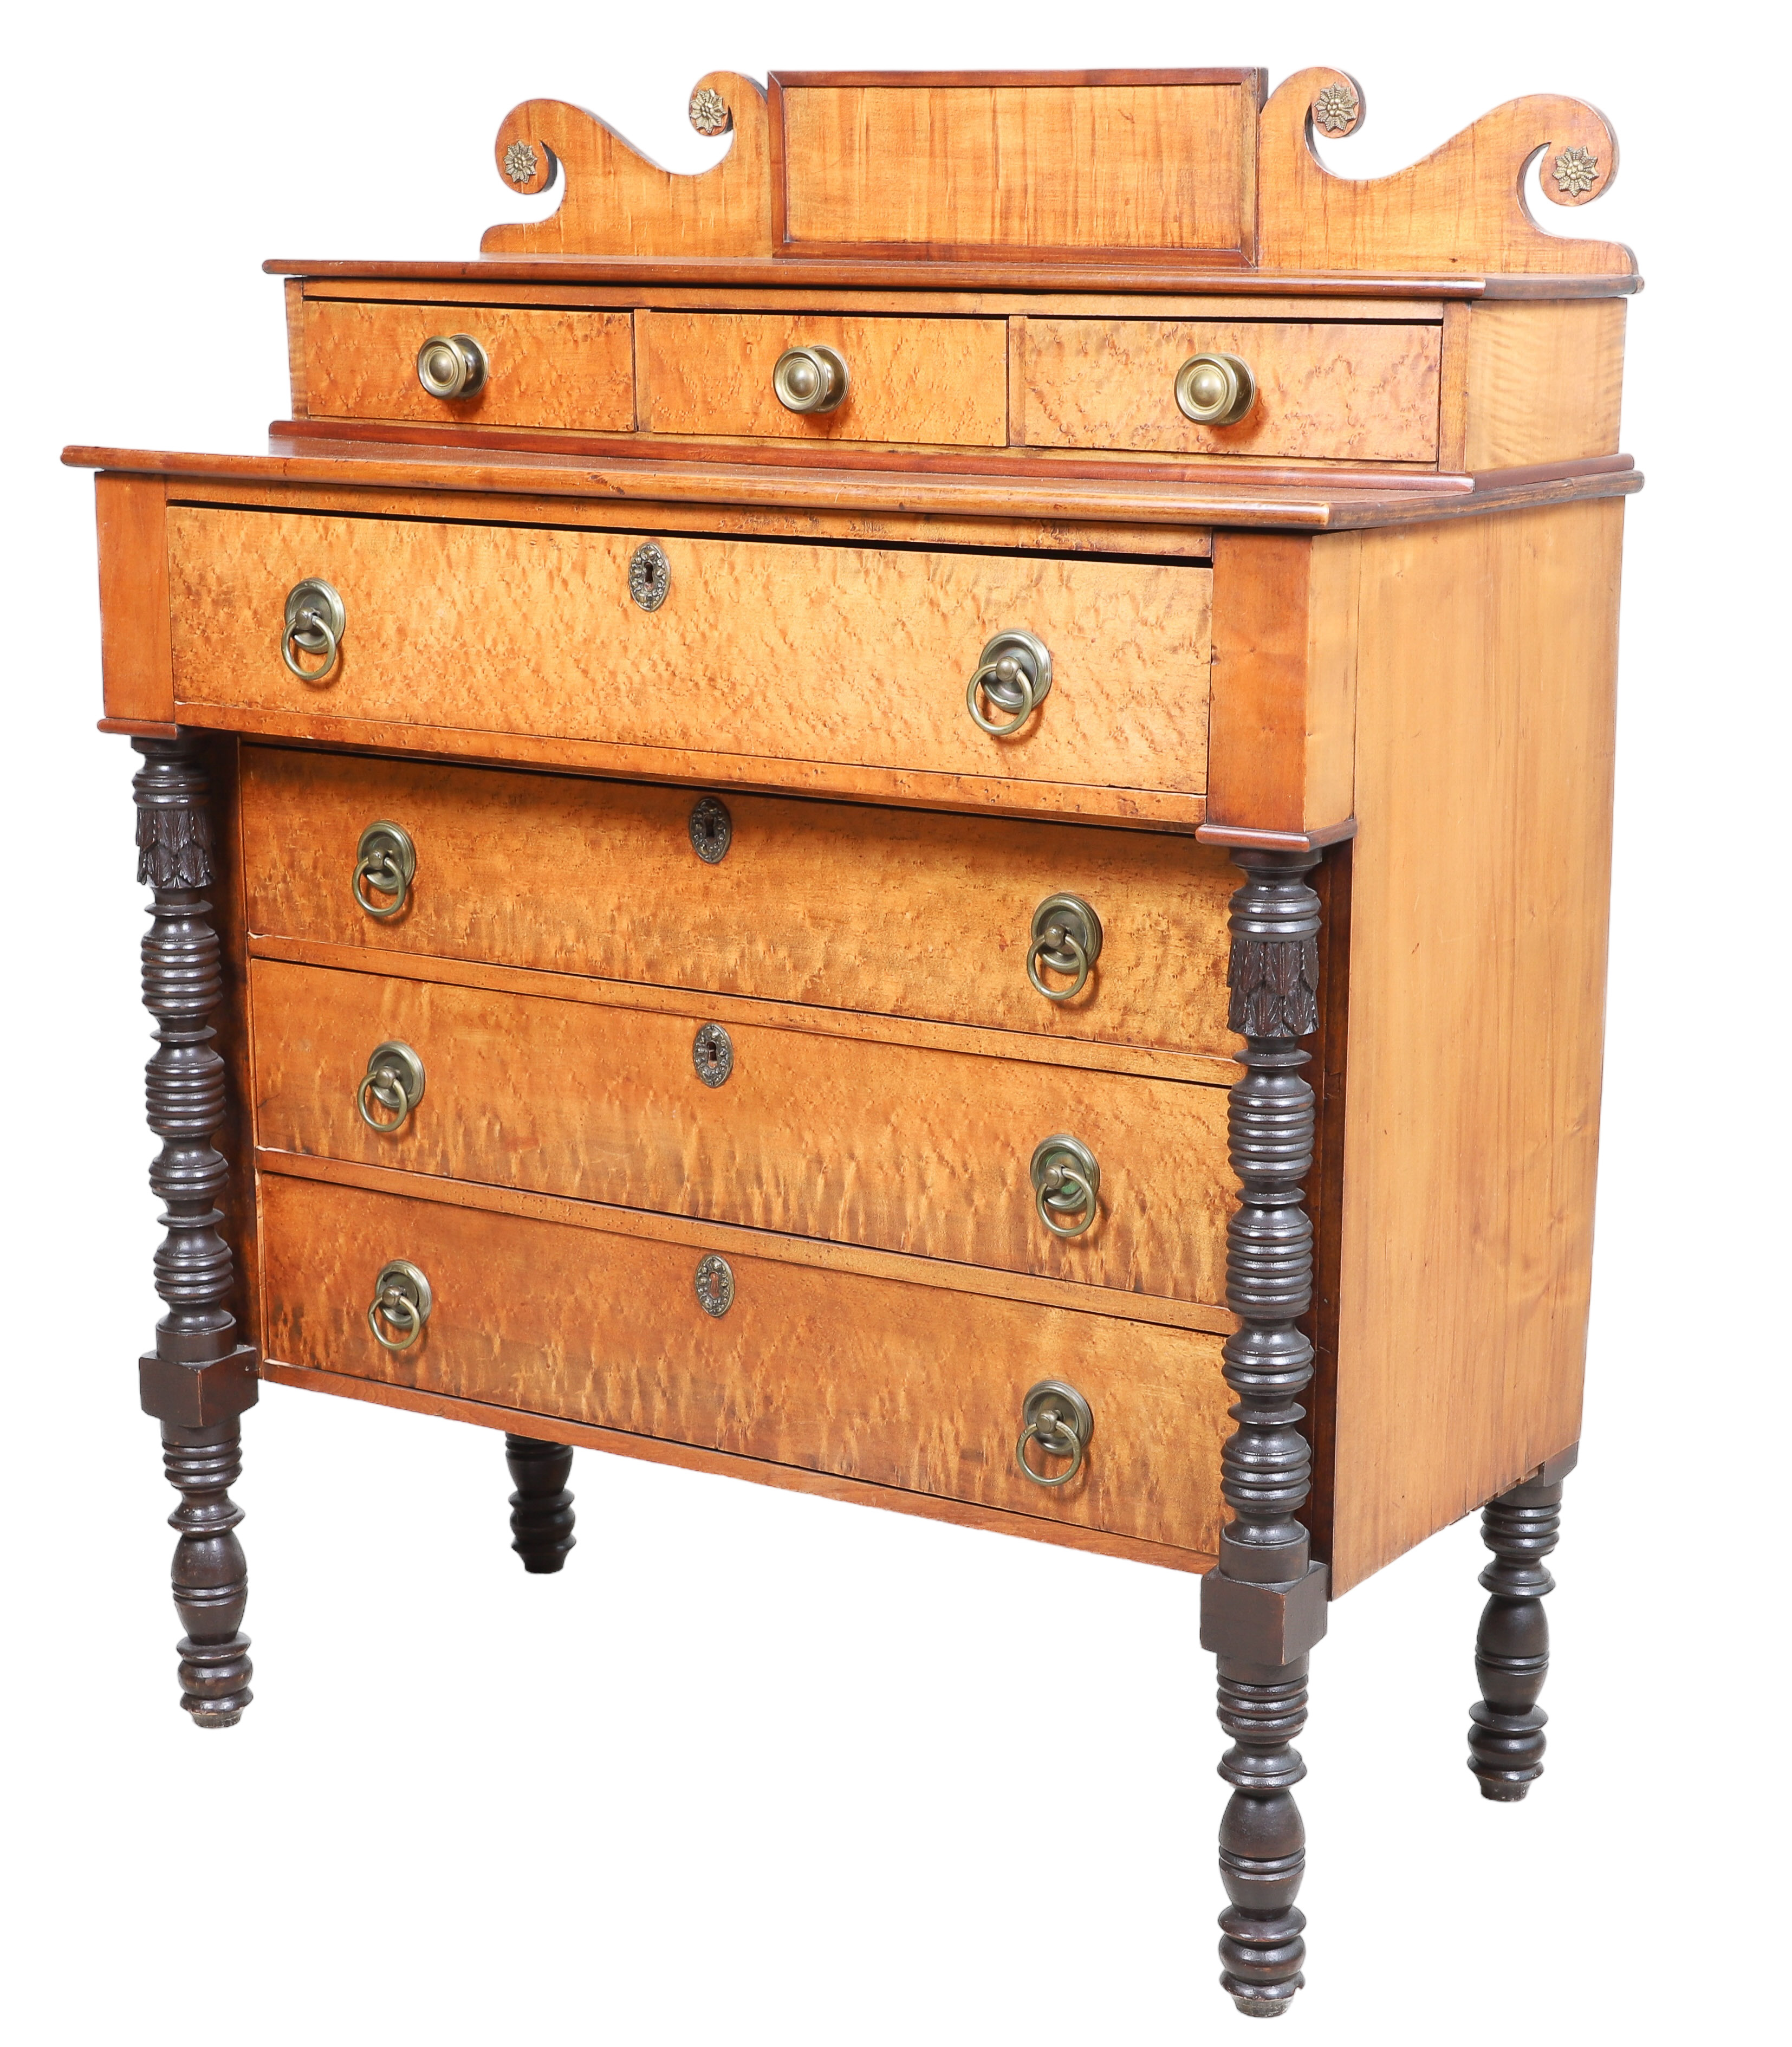 Classical cherry and figured maple chest